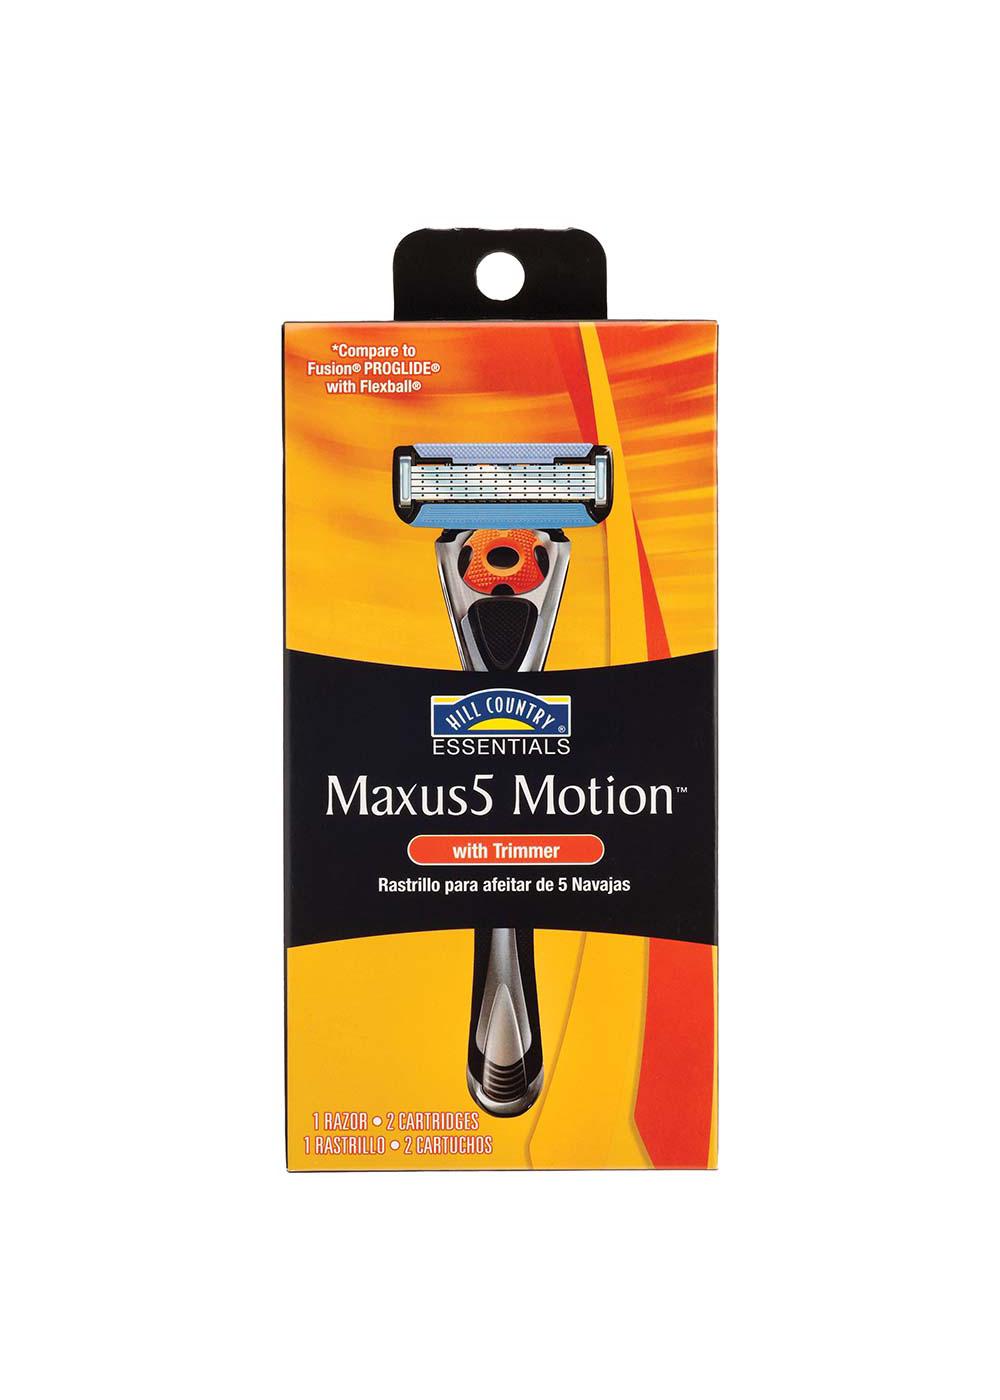 Hill Country Essentials Maxus 5 Motion; image 1 of 6